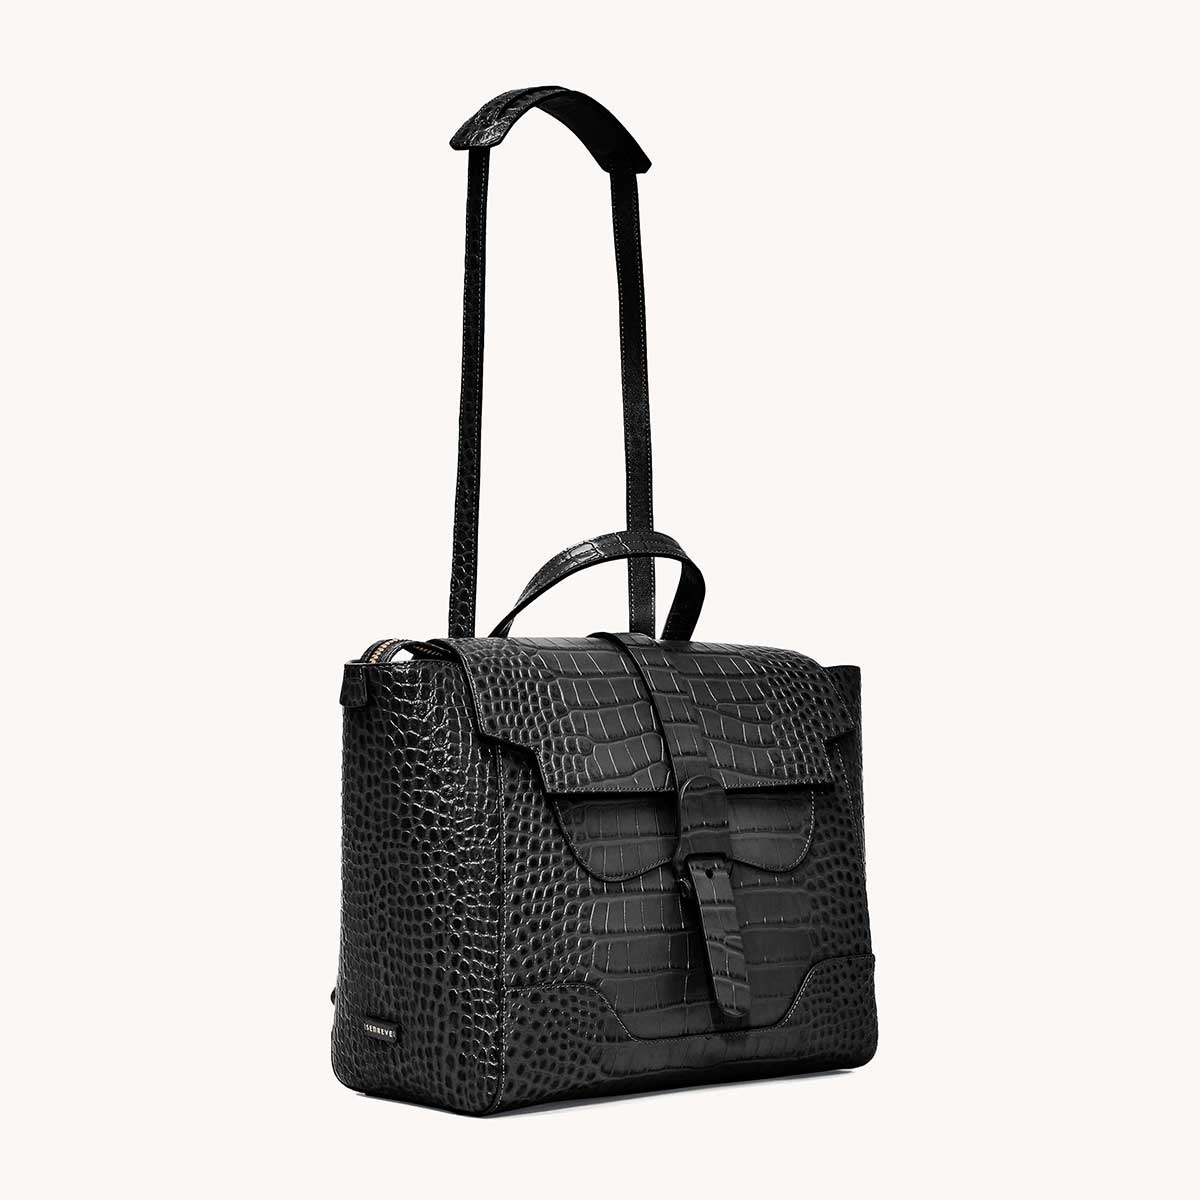 Maestra Bag Dragon Noir with Gold Hardware Quarter Angle to Front View